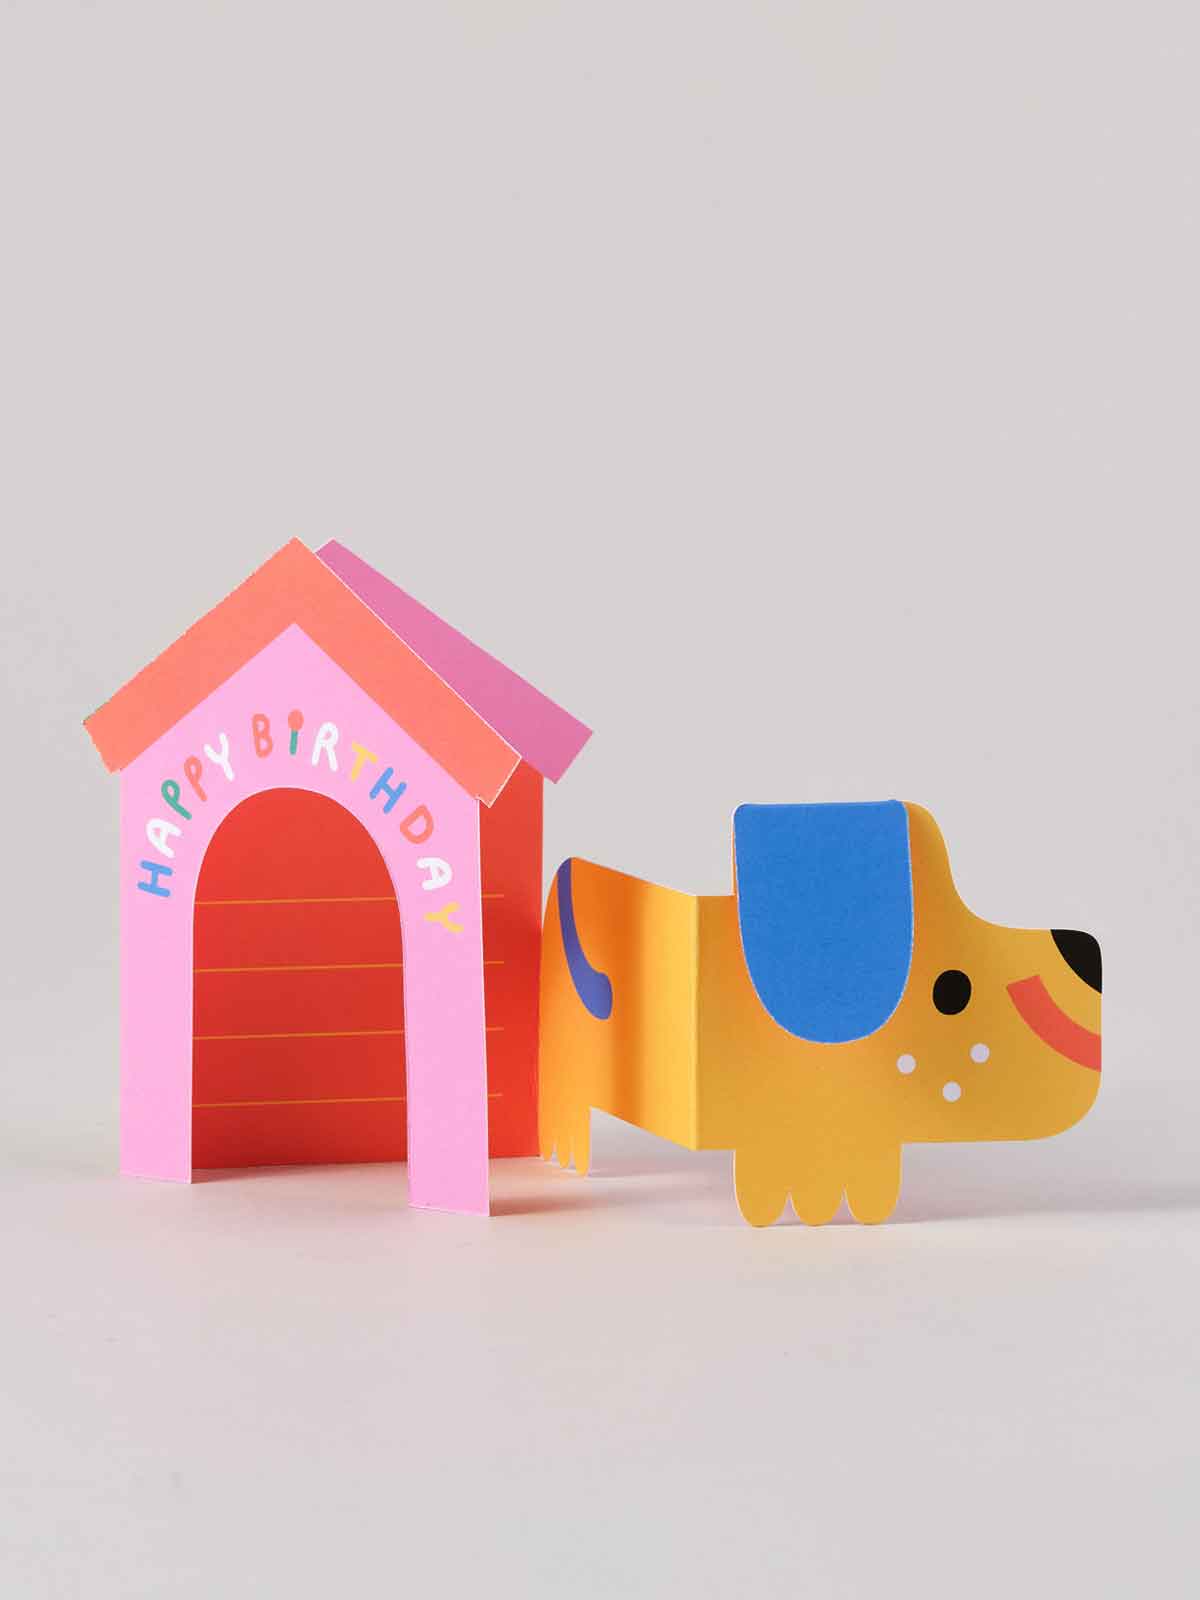 Dog In House Fold Out Card